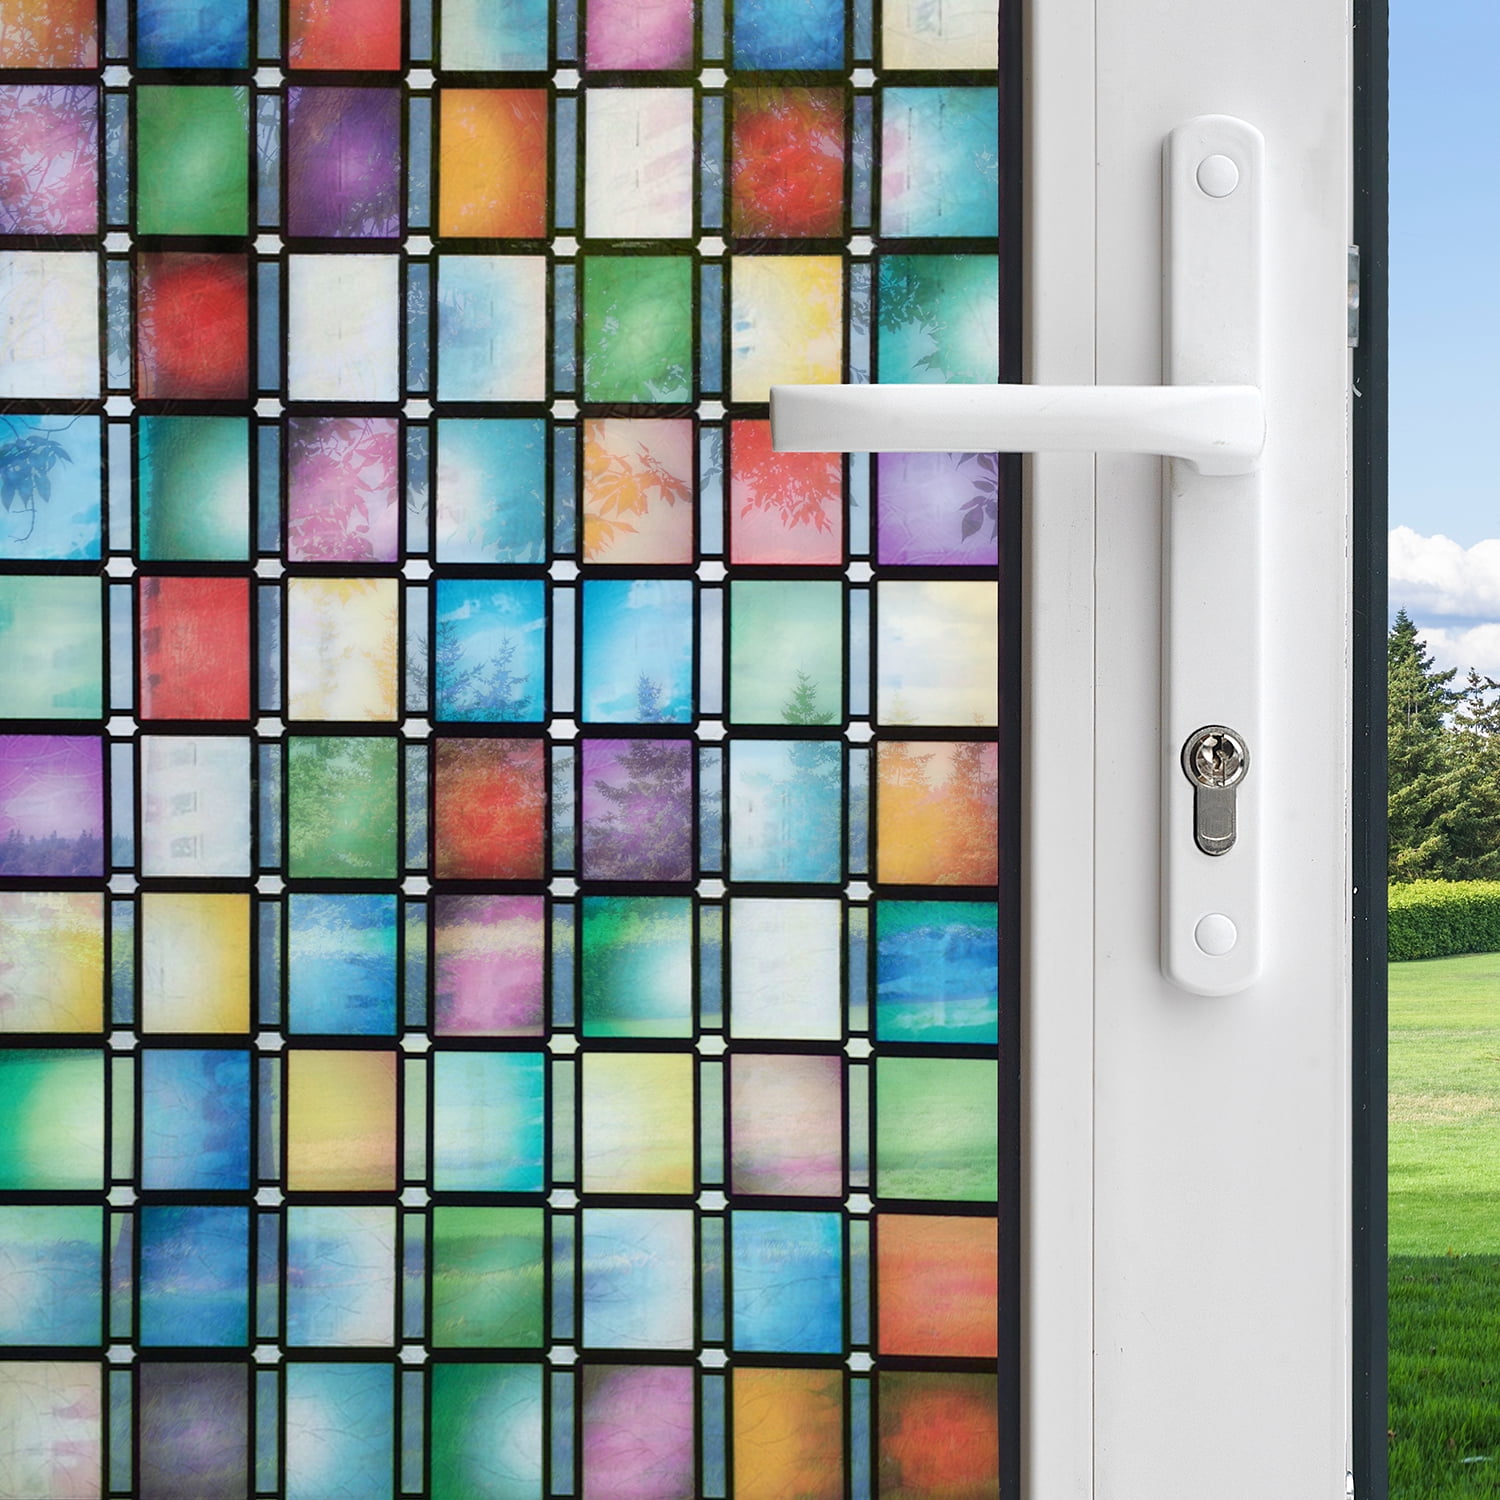 Details about   3D Mosaic bathroom stickers Colorful Square Stained Glass Window Door Film Decor 